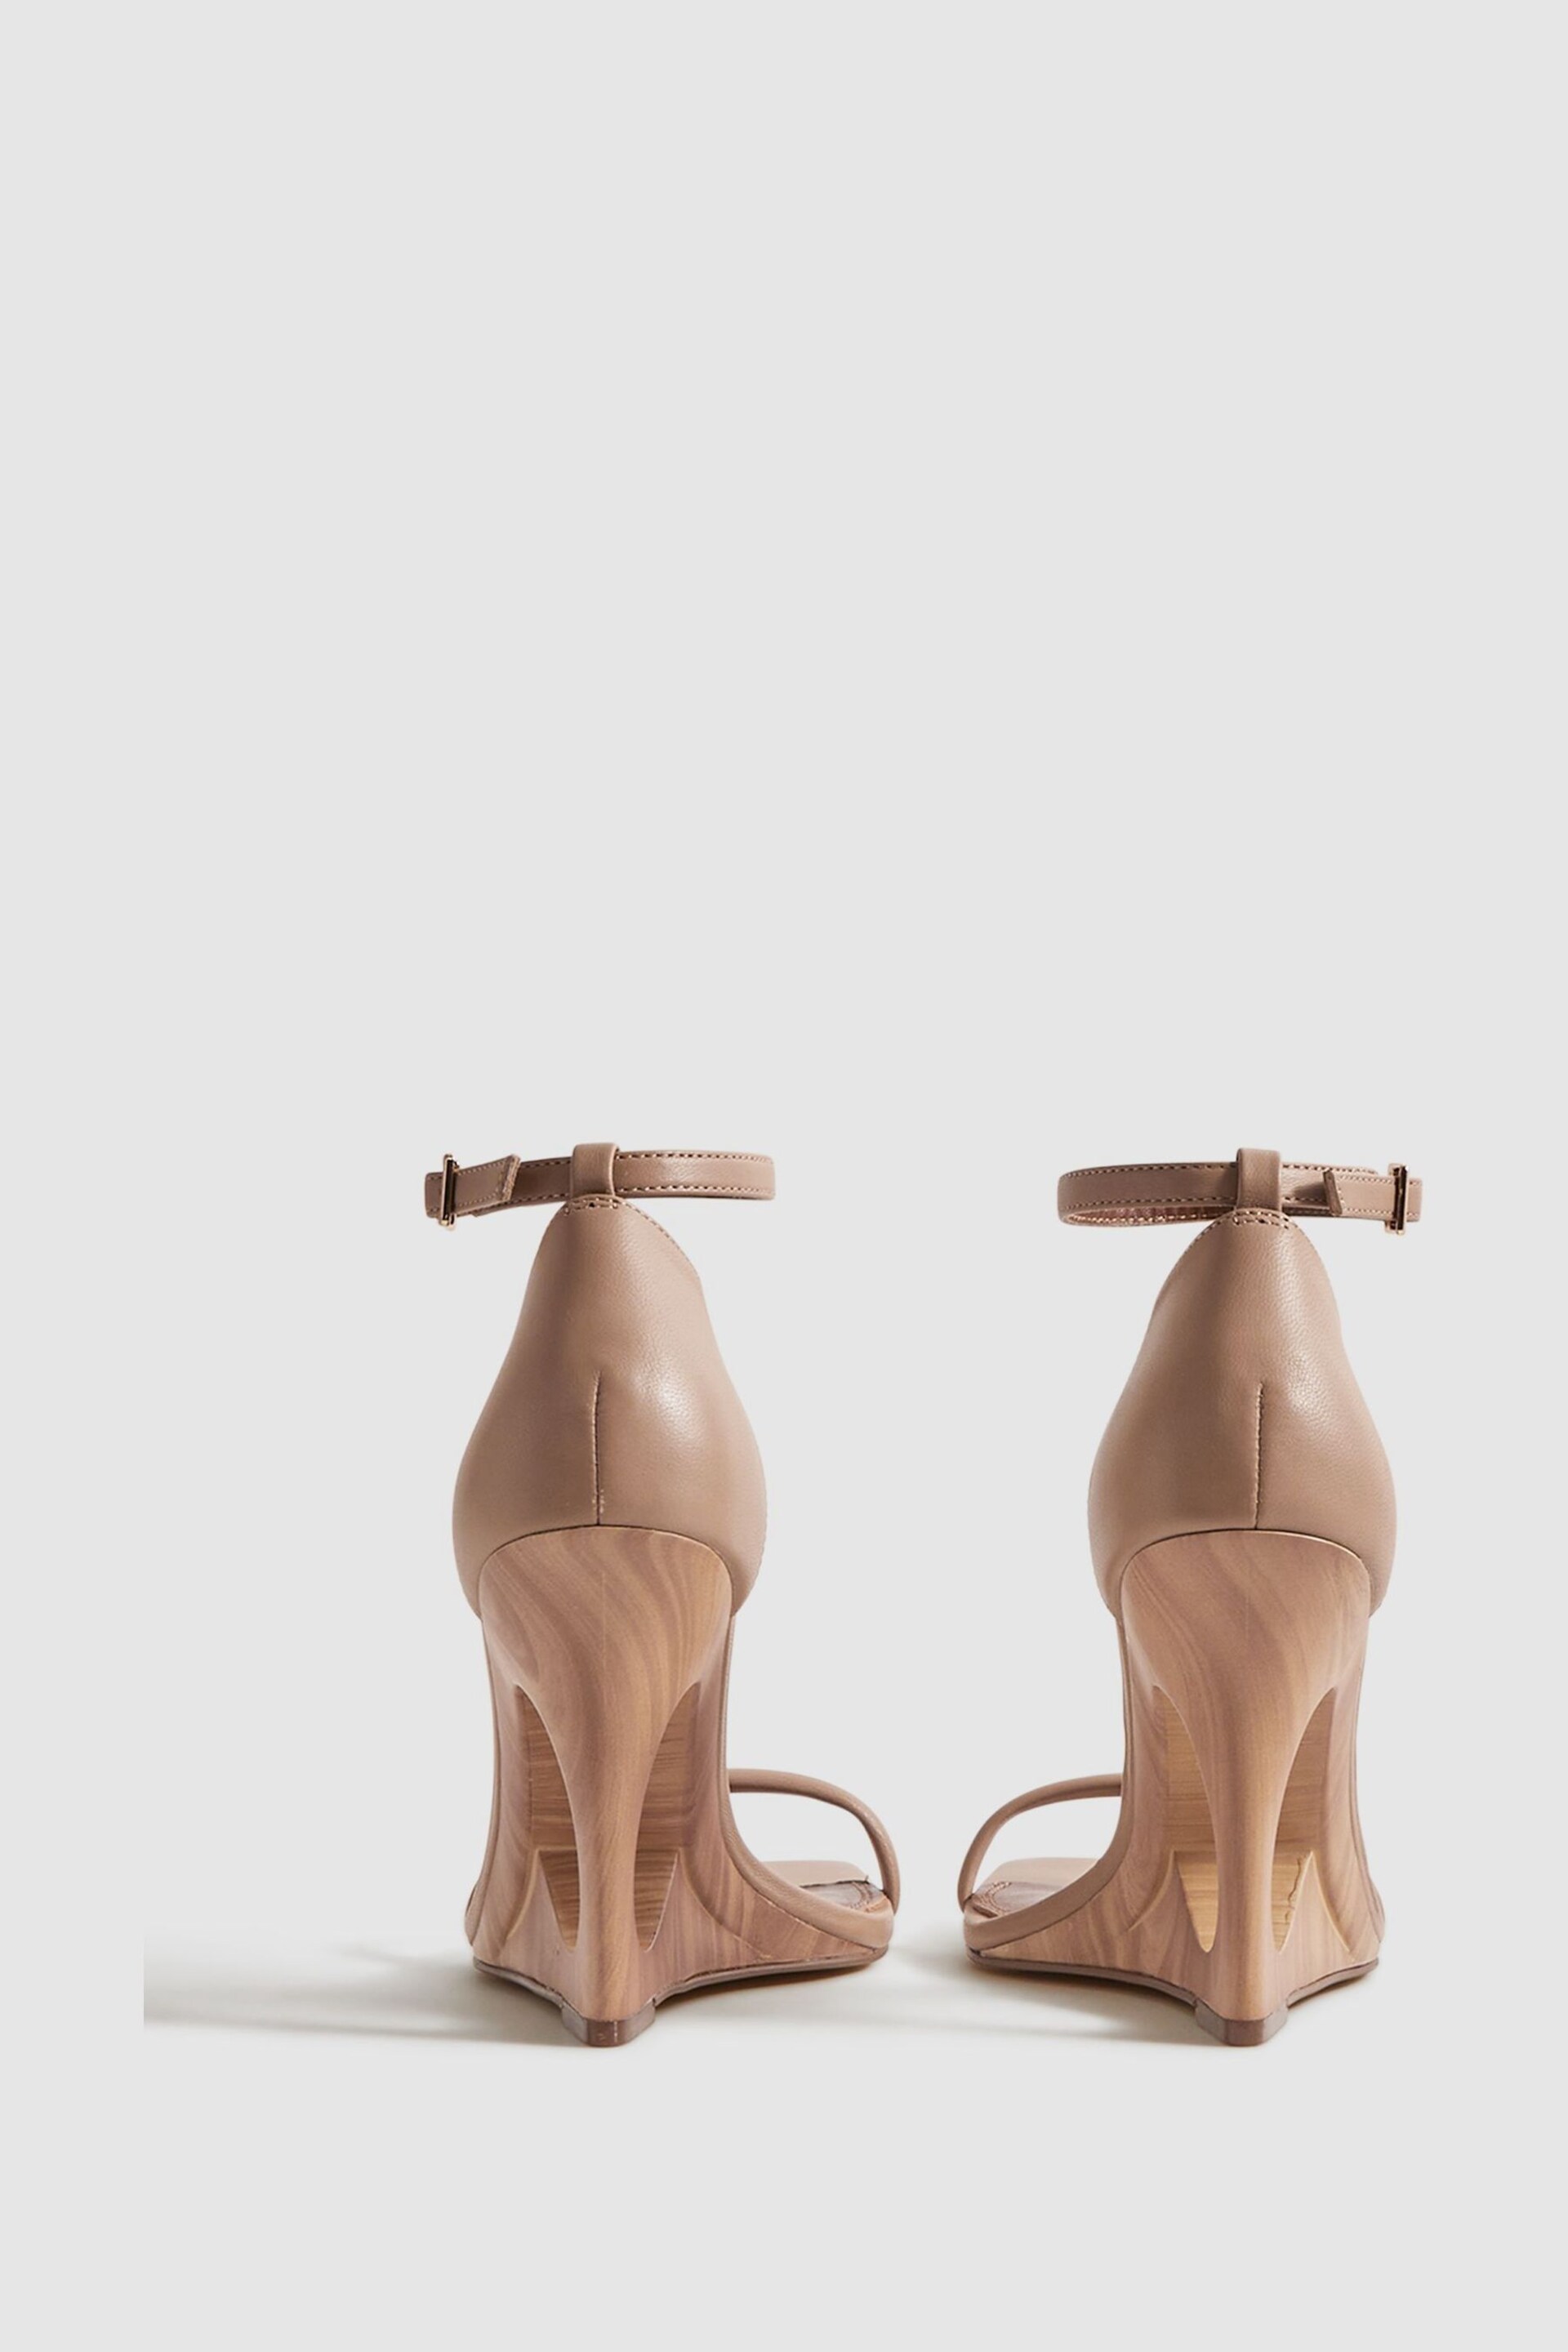 Reiss Nude Cora Leather Strappy Wedge Heels - Image 4 of 5